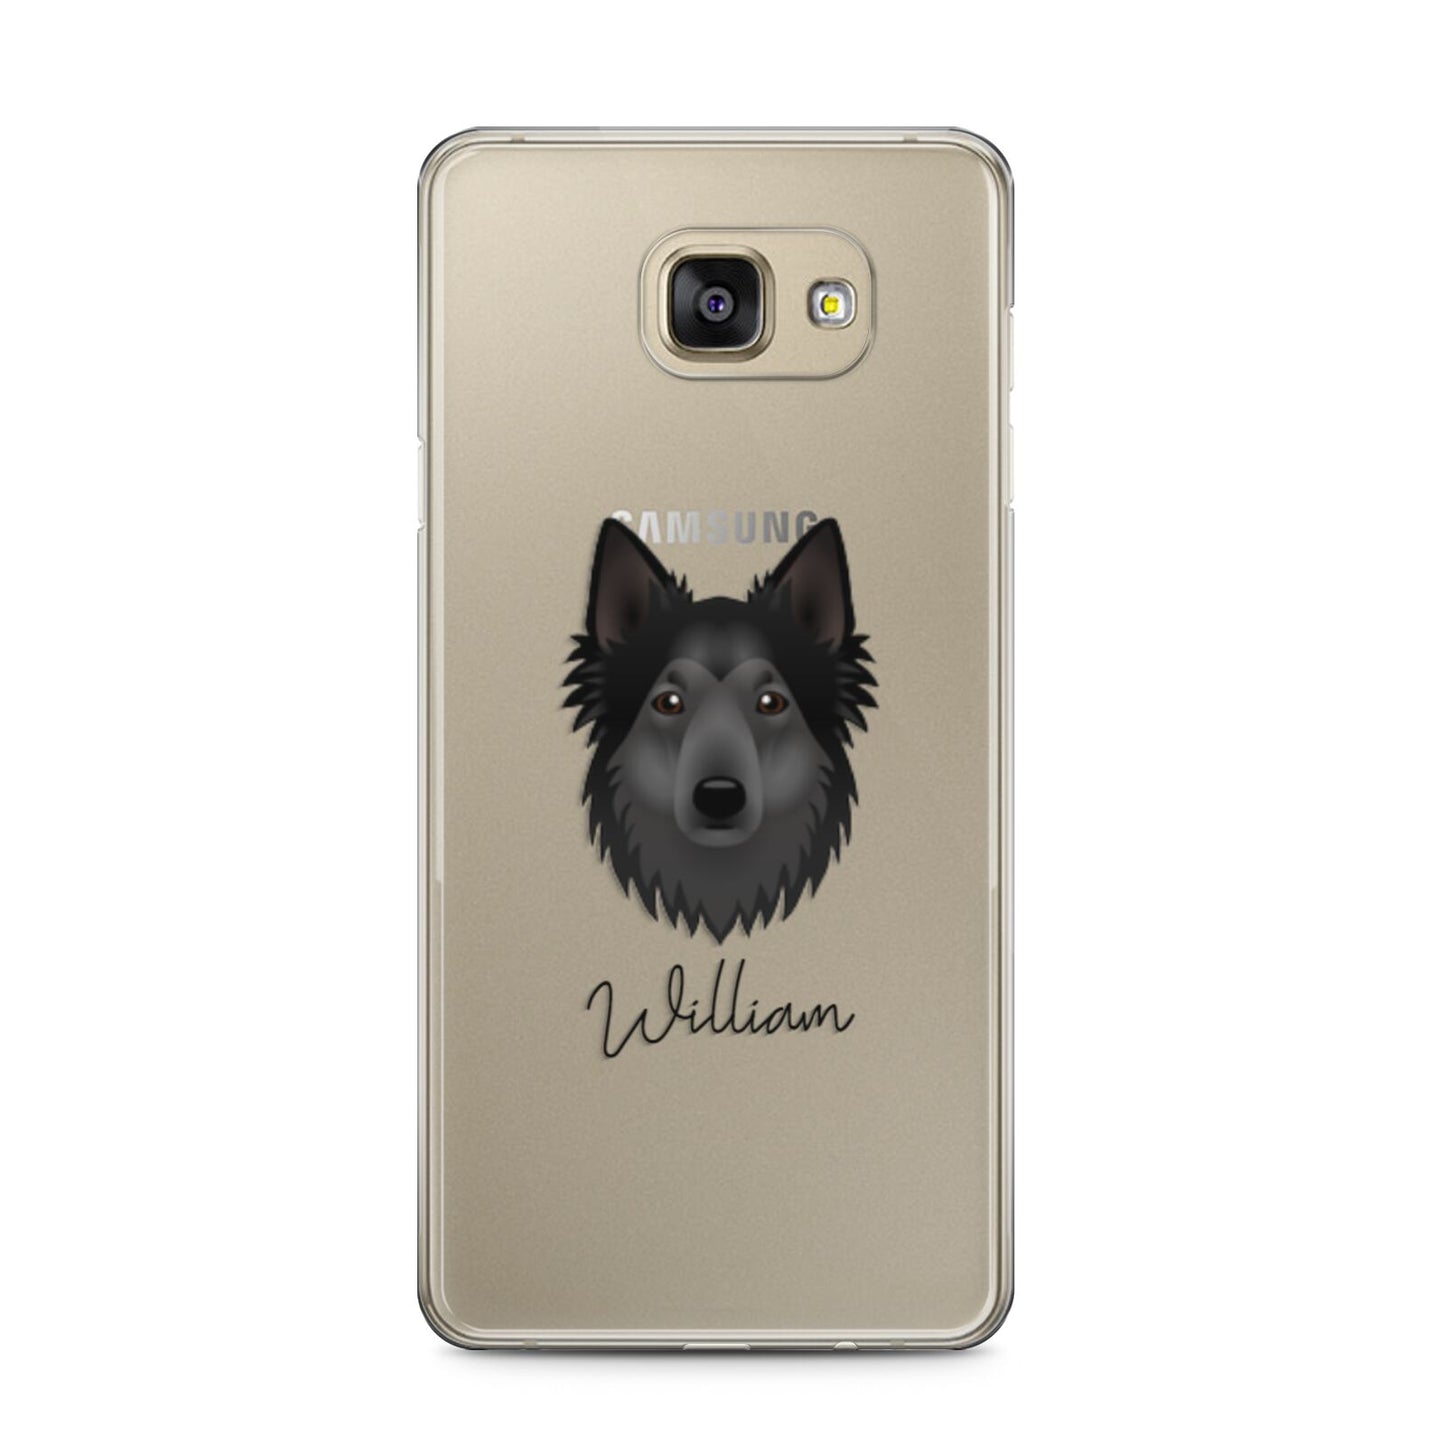 Shollie Personalised Samsung Galaxy A5 2016 Case on gold phone